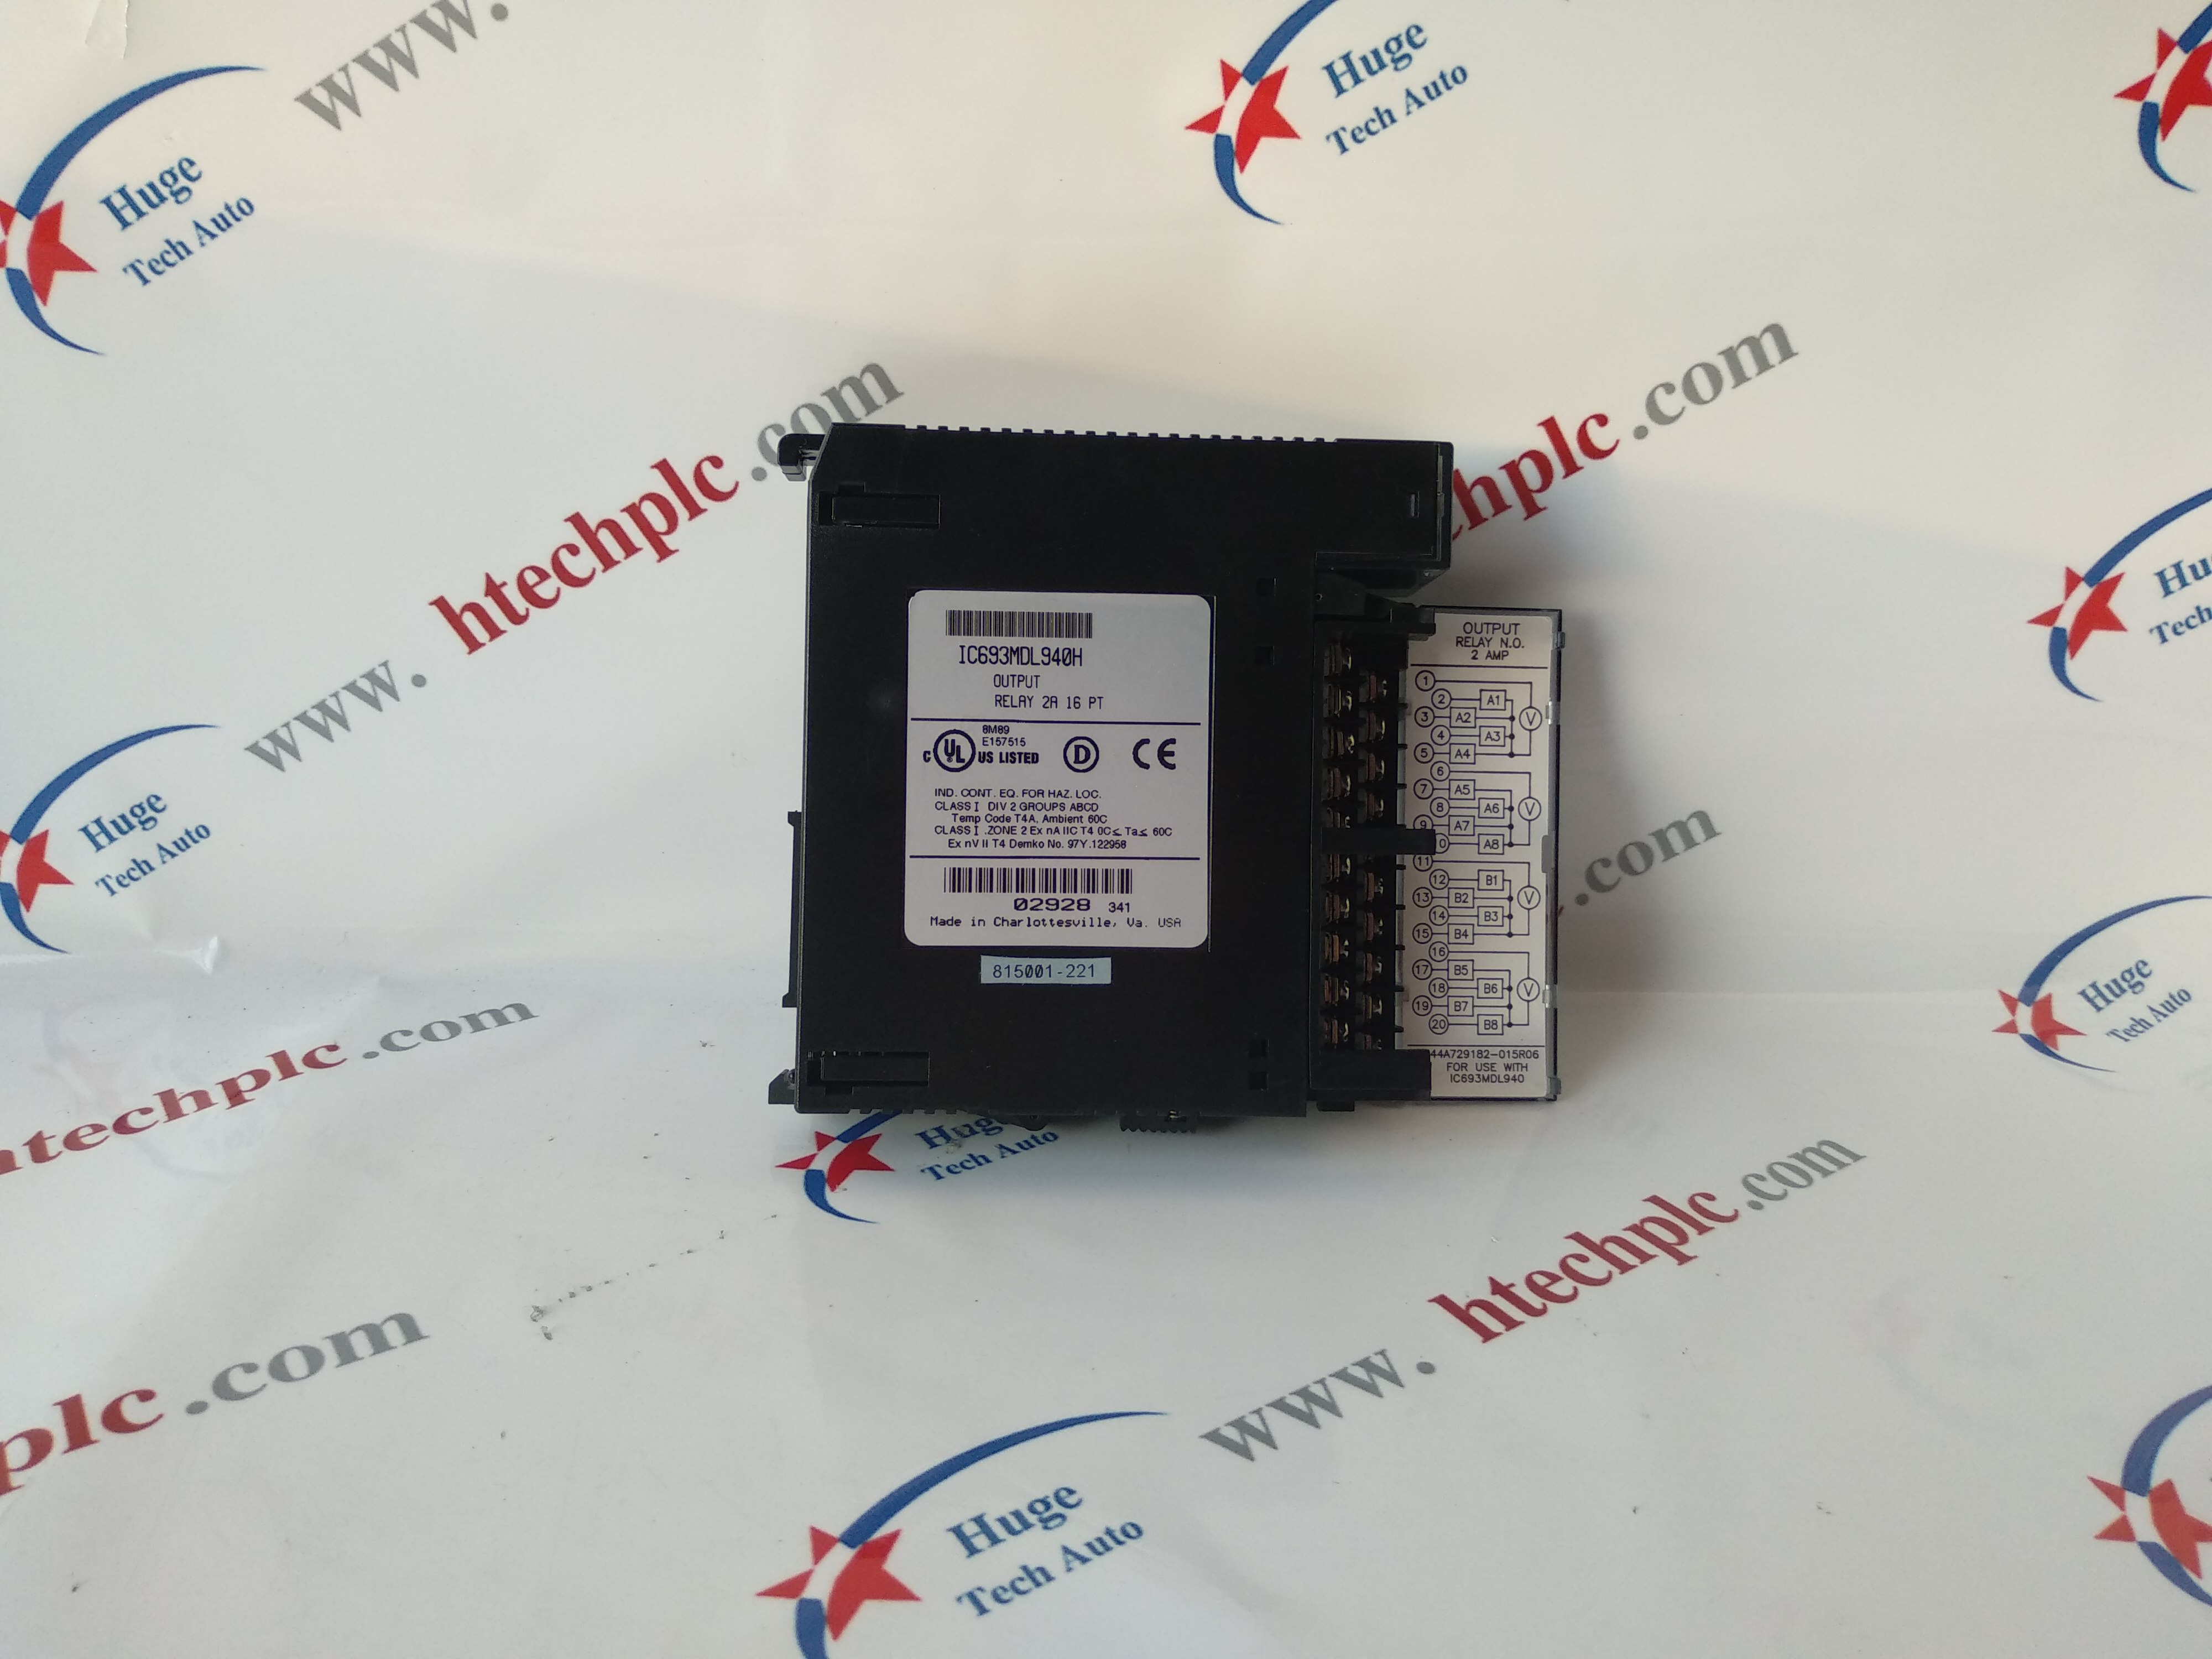 GE 531X140CCHANM2 brand new PLC DCS TSI system spare parts in stock